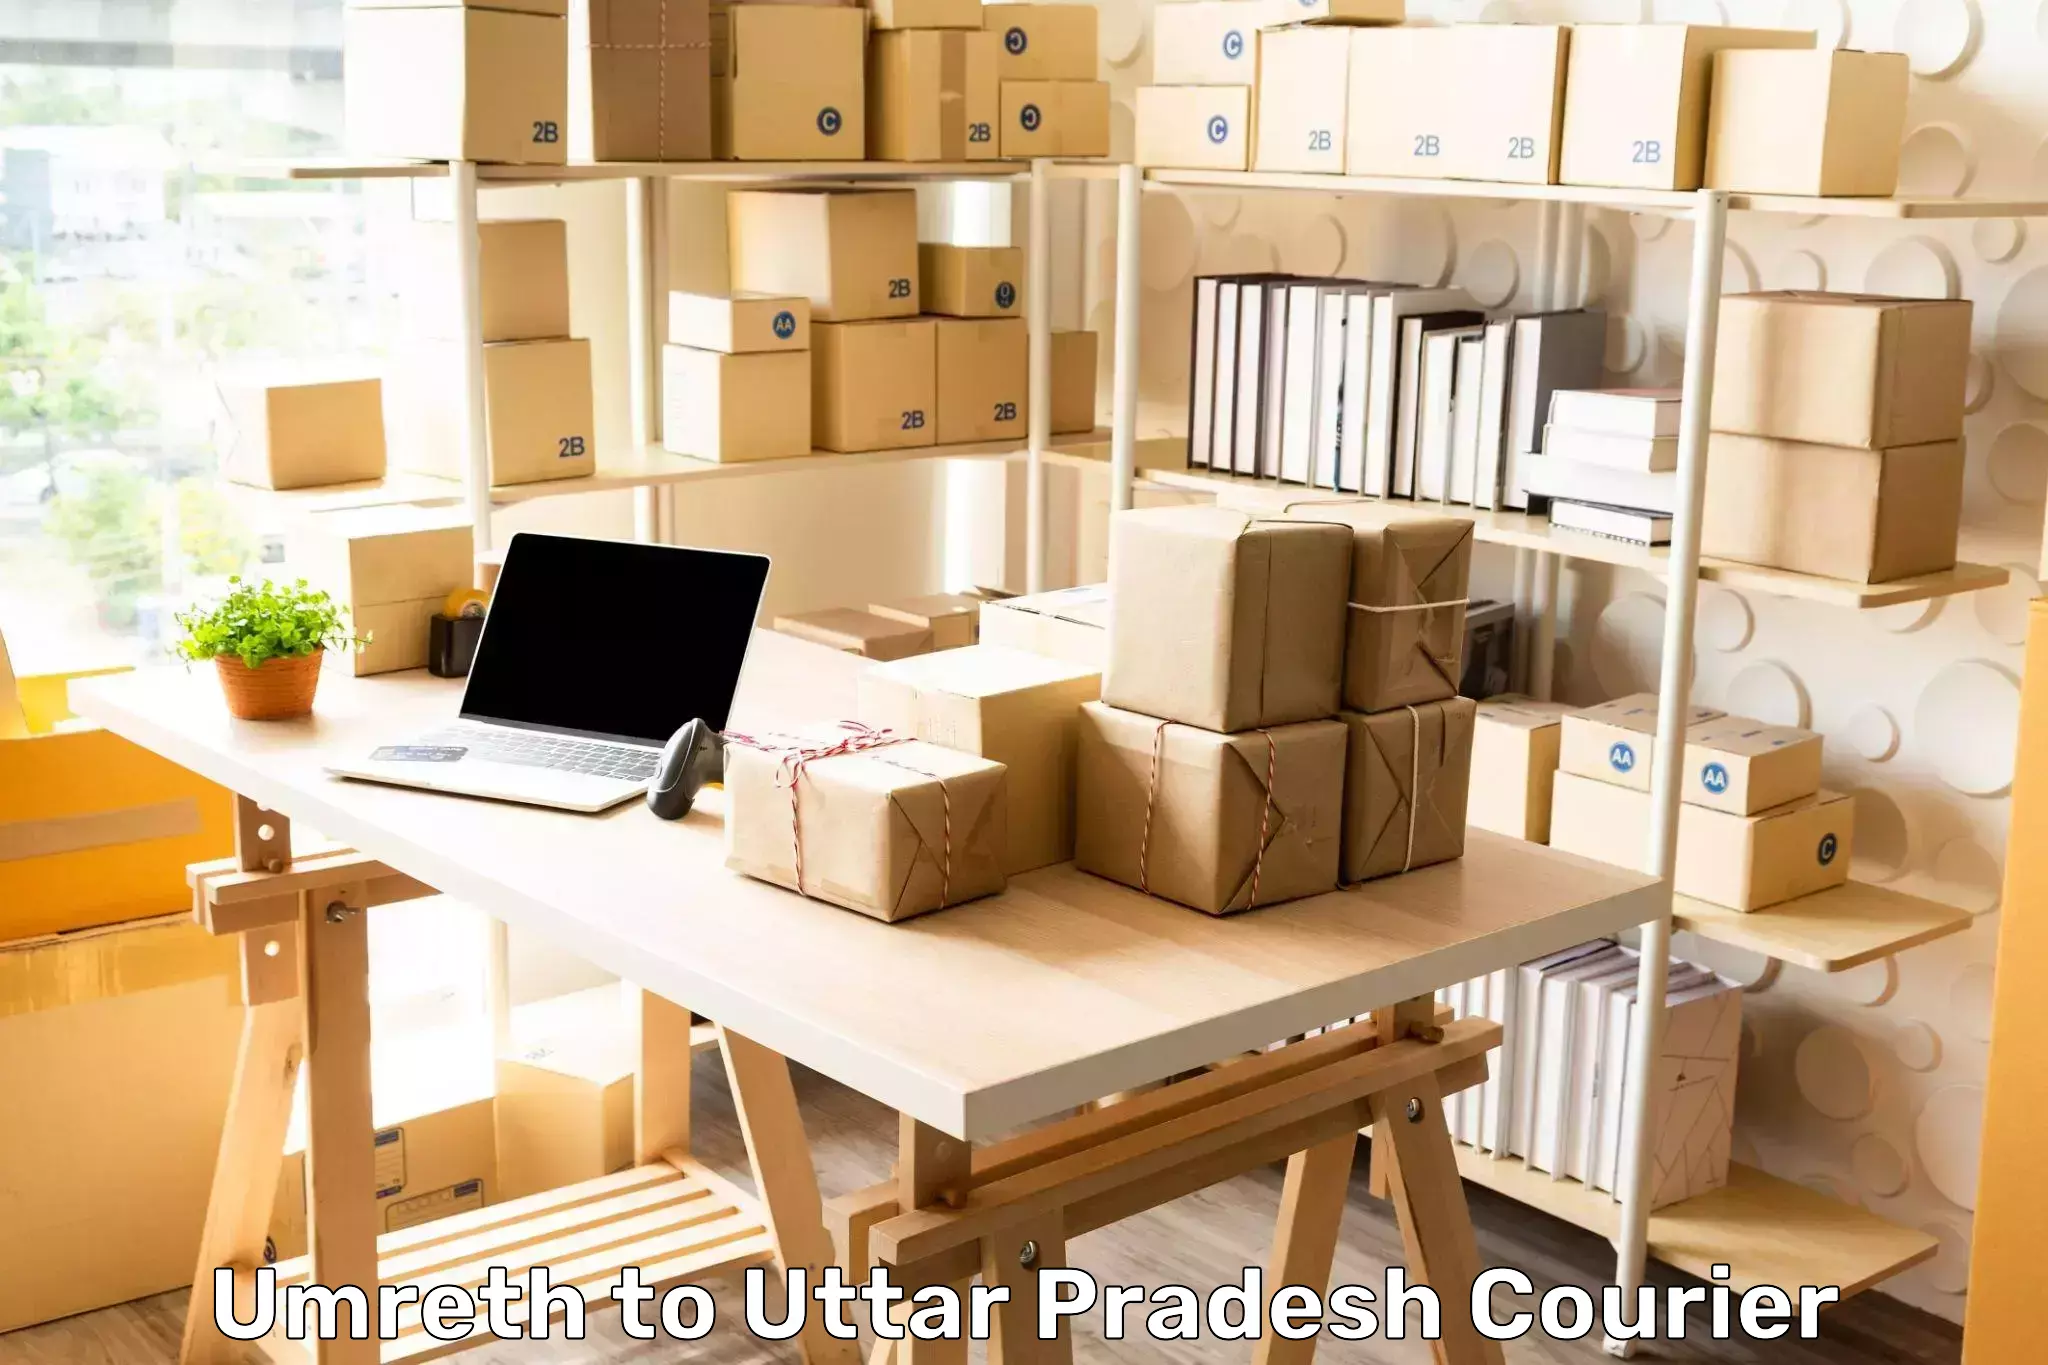 Punctual parcel services Umreth to Sultanpur